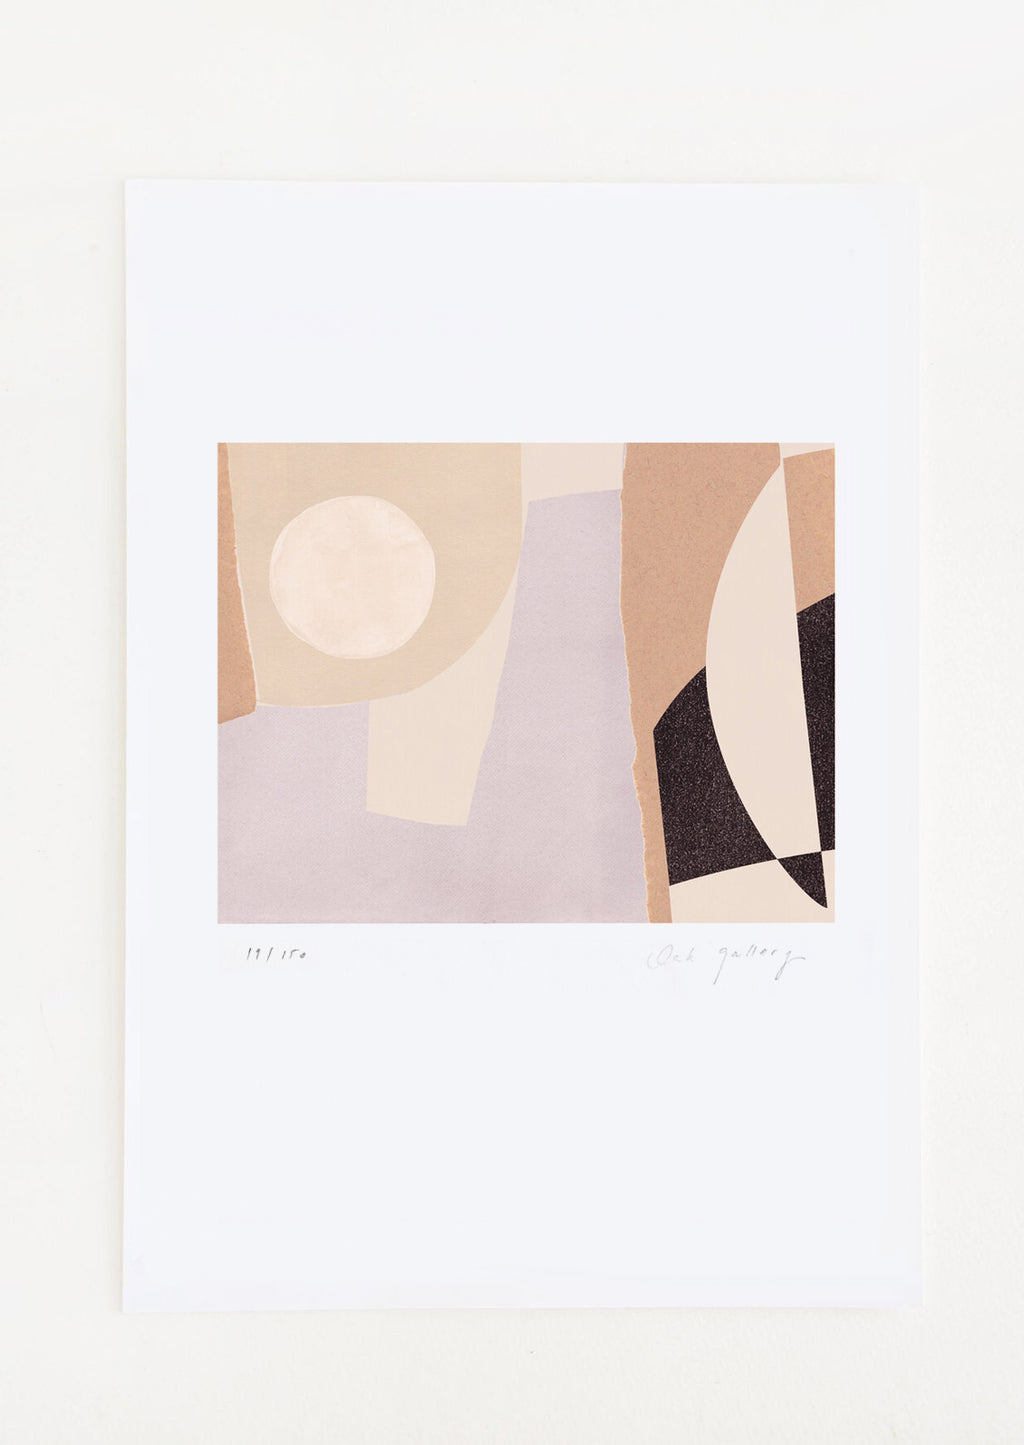 1: An abstract art print featuring geometric shapes in black, brown, cream and lilac.